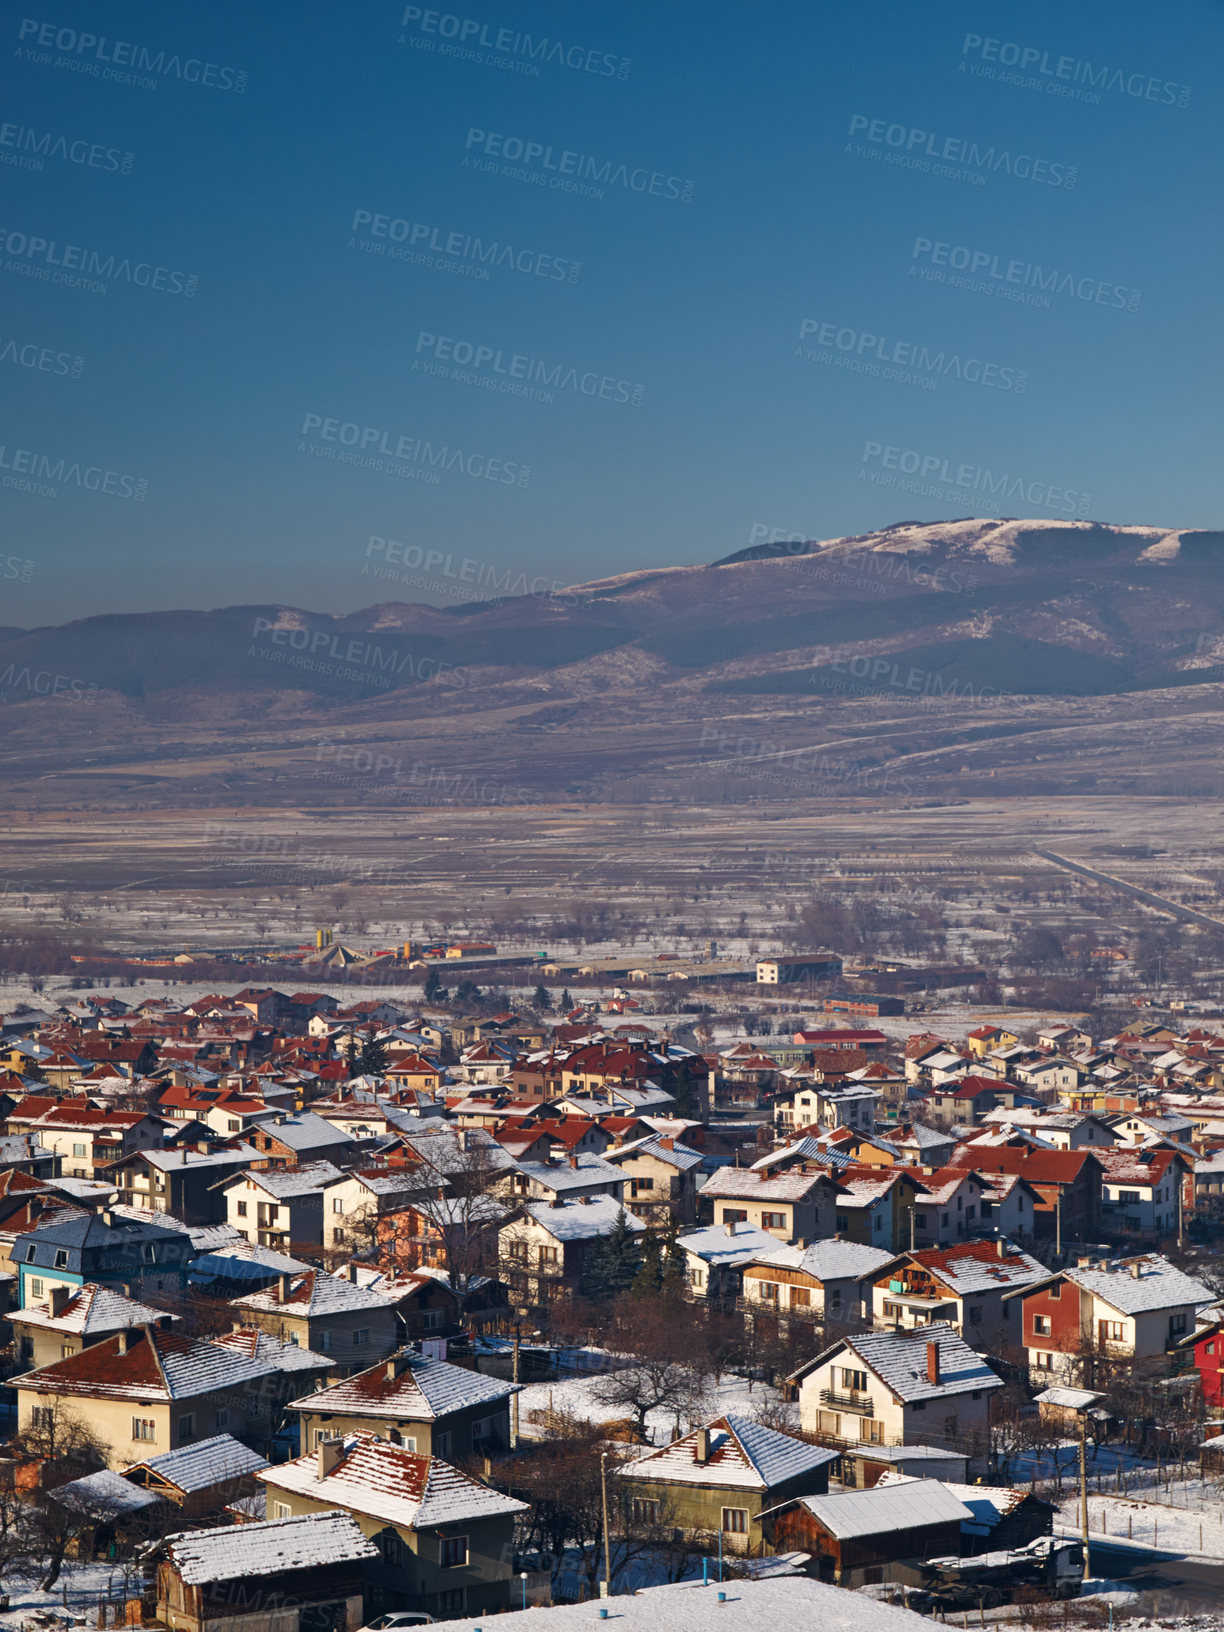 Buy stock photo Mountain, houses and village with snow in winter, landscape in Sweden or travel to vacation property. Europe, holiday and ice on real estate homes in town on hill with blue sky and environment